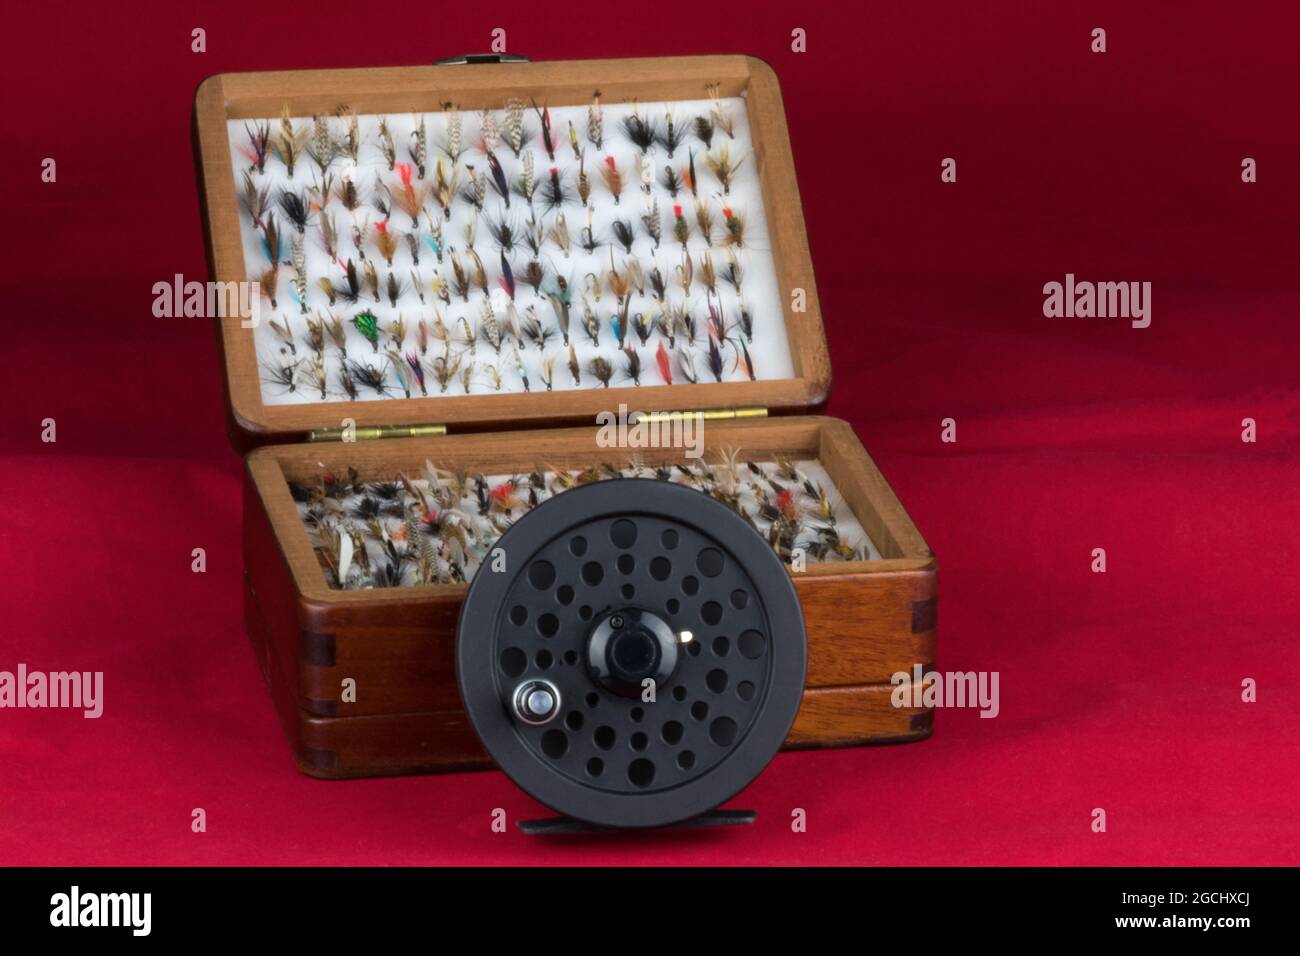 https://c8.alamy.com/comp/2GCHXCJ/fly-fishing-reel-with-flies-and-fly-box-isolated-on-red-2GCHXCJ.jpg